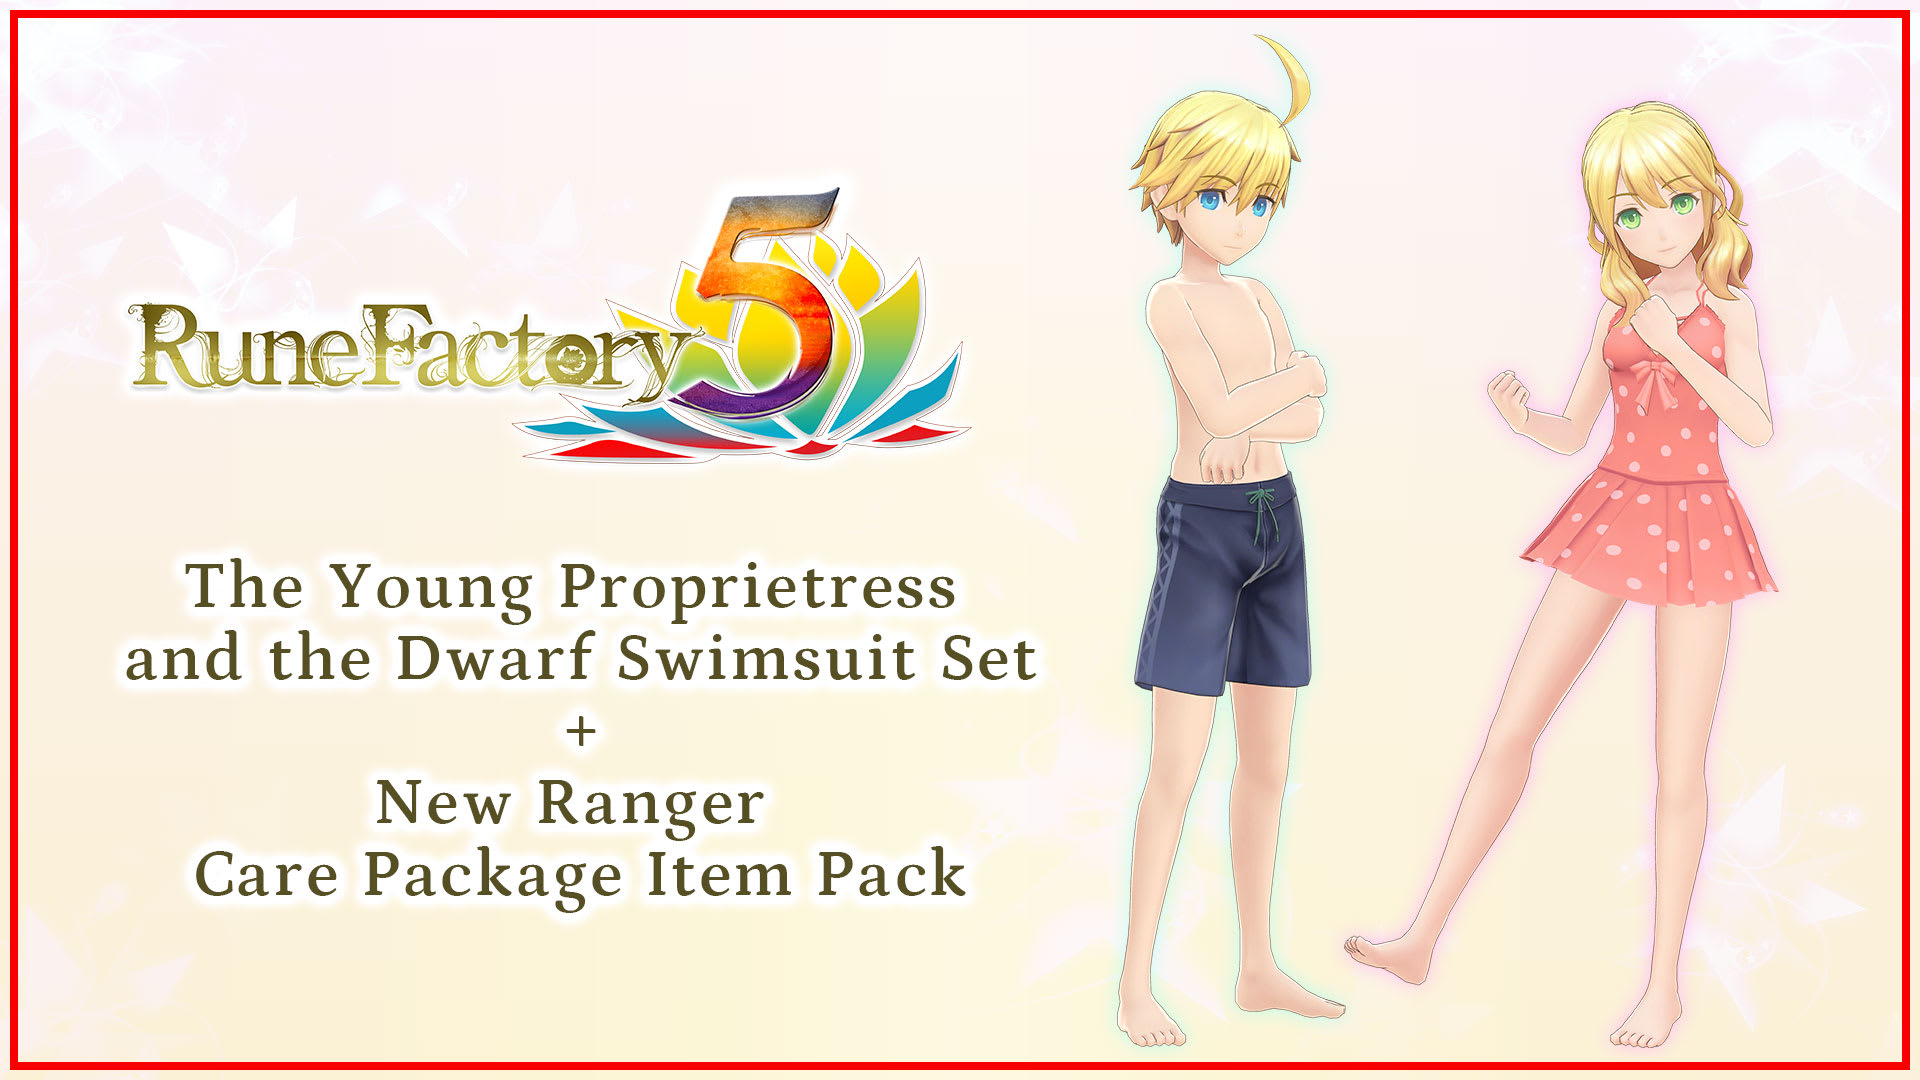 The Young Proprietress and the Dwarf Swimsuit Set + New Ranger Care Package Item Pack